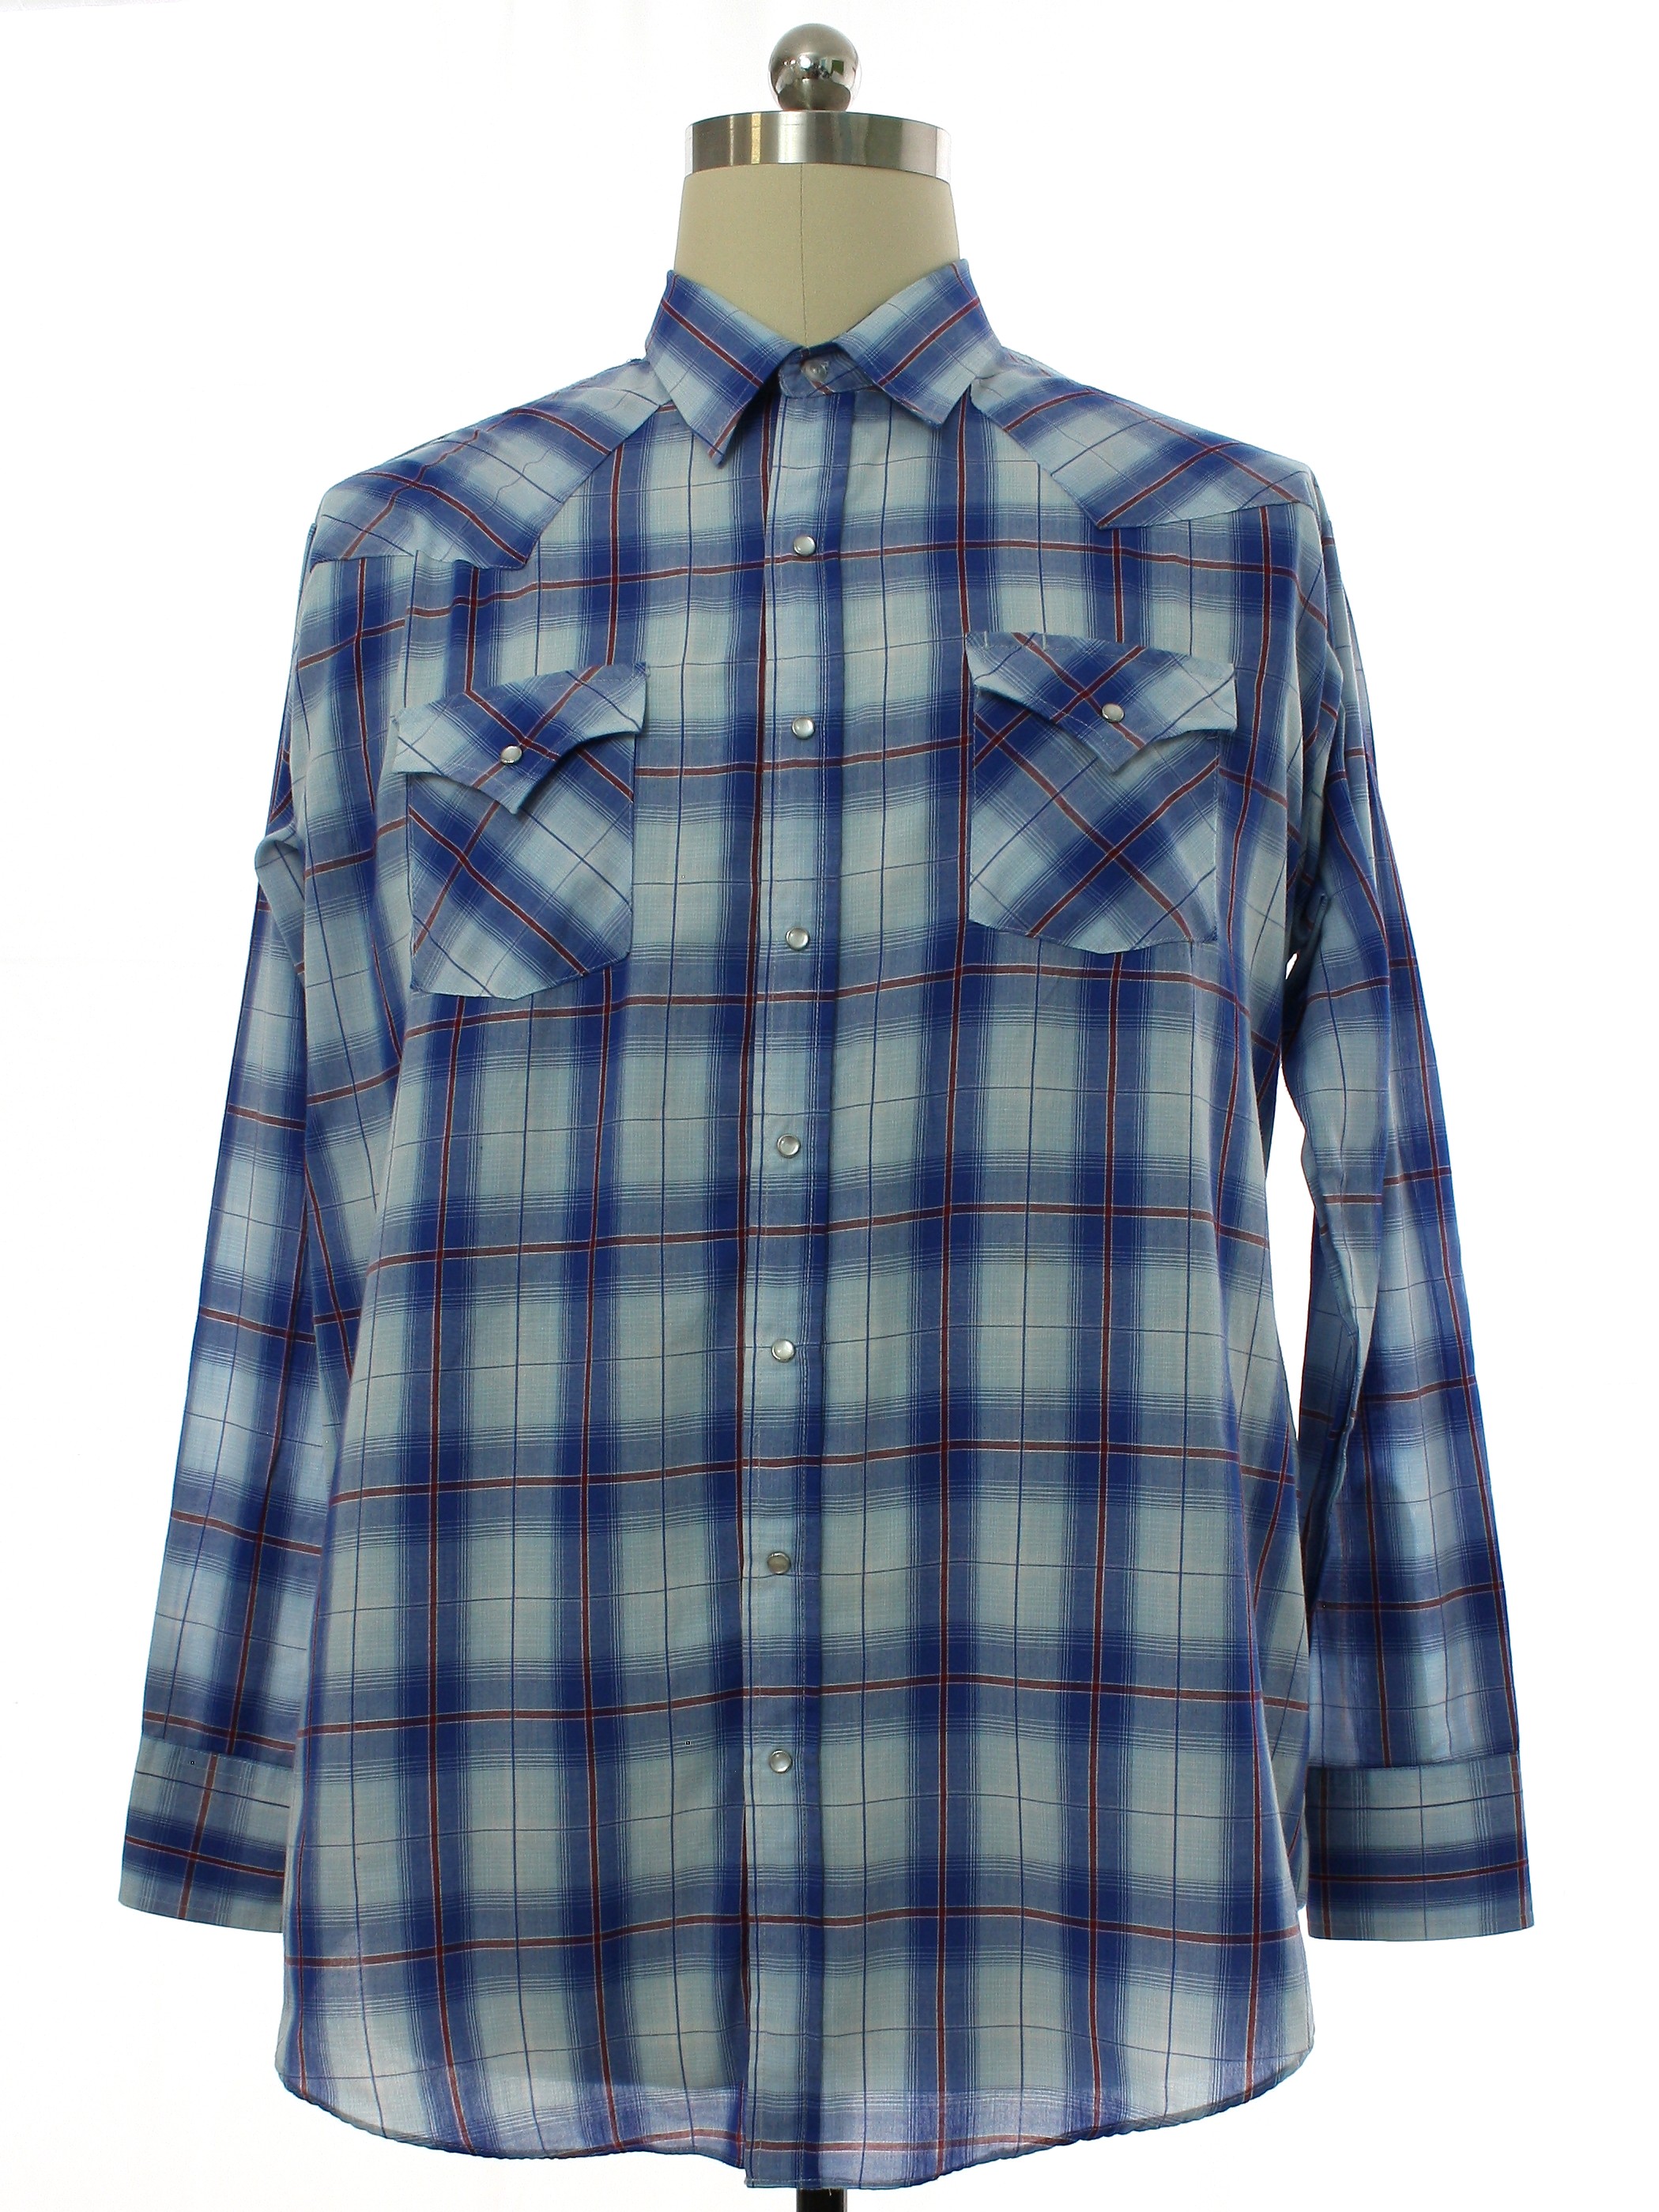 Western Shirt: 90s -Ely Cattleman- Mens shades of blue plaid polyester